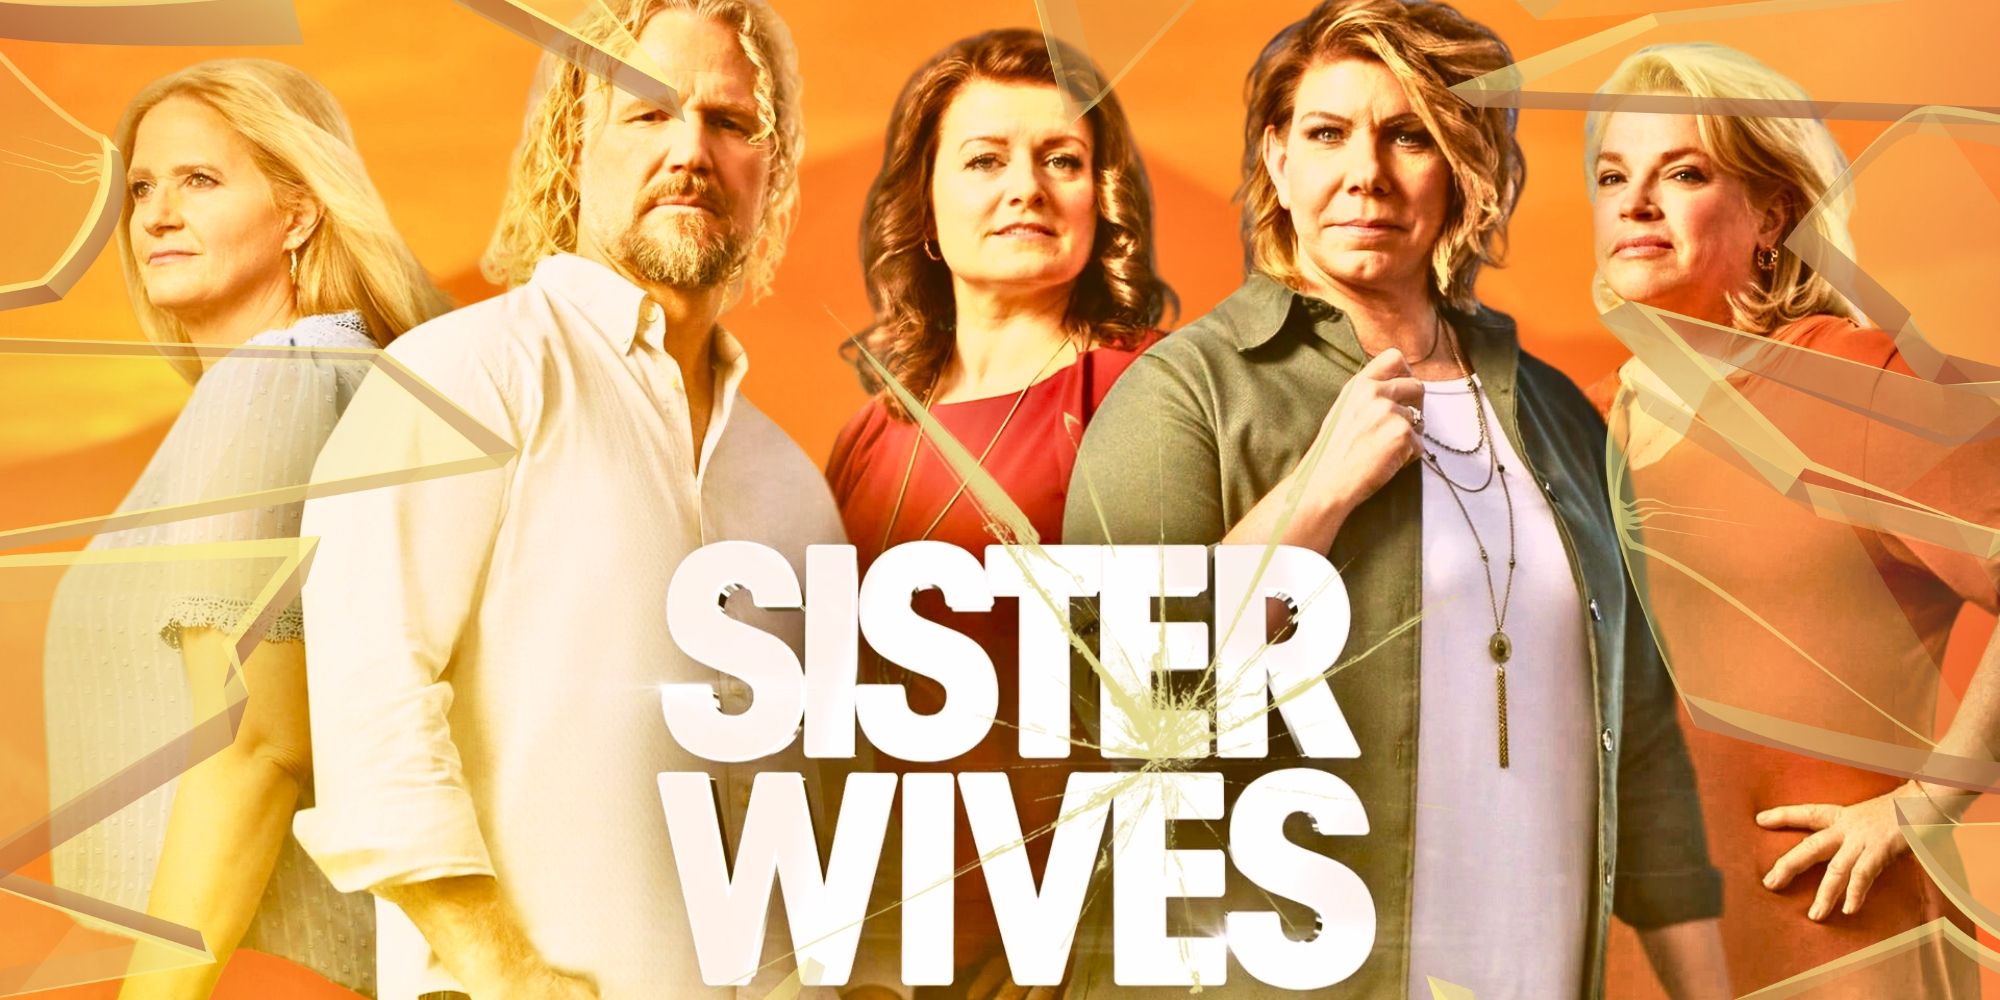 Sister Wives stars Kody, Meri, Robyn, Janelle, and Christine for promo shot with logo